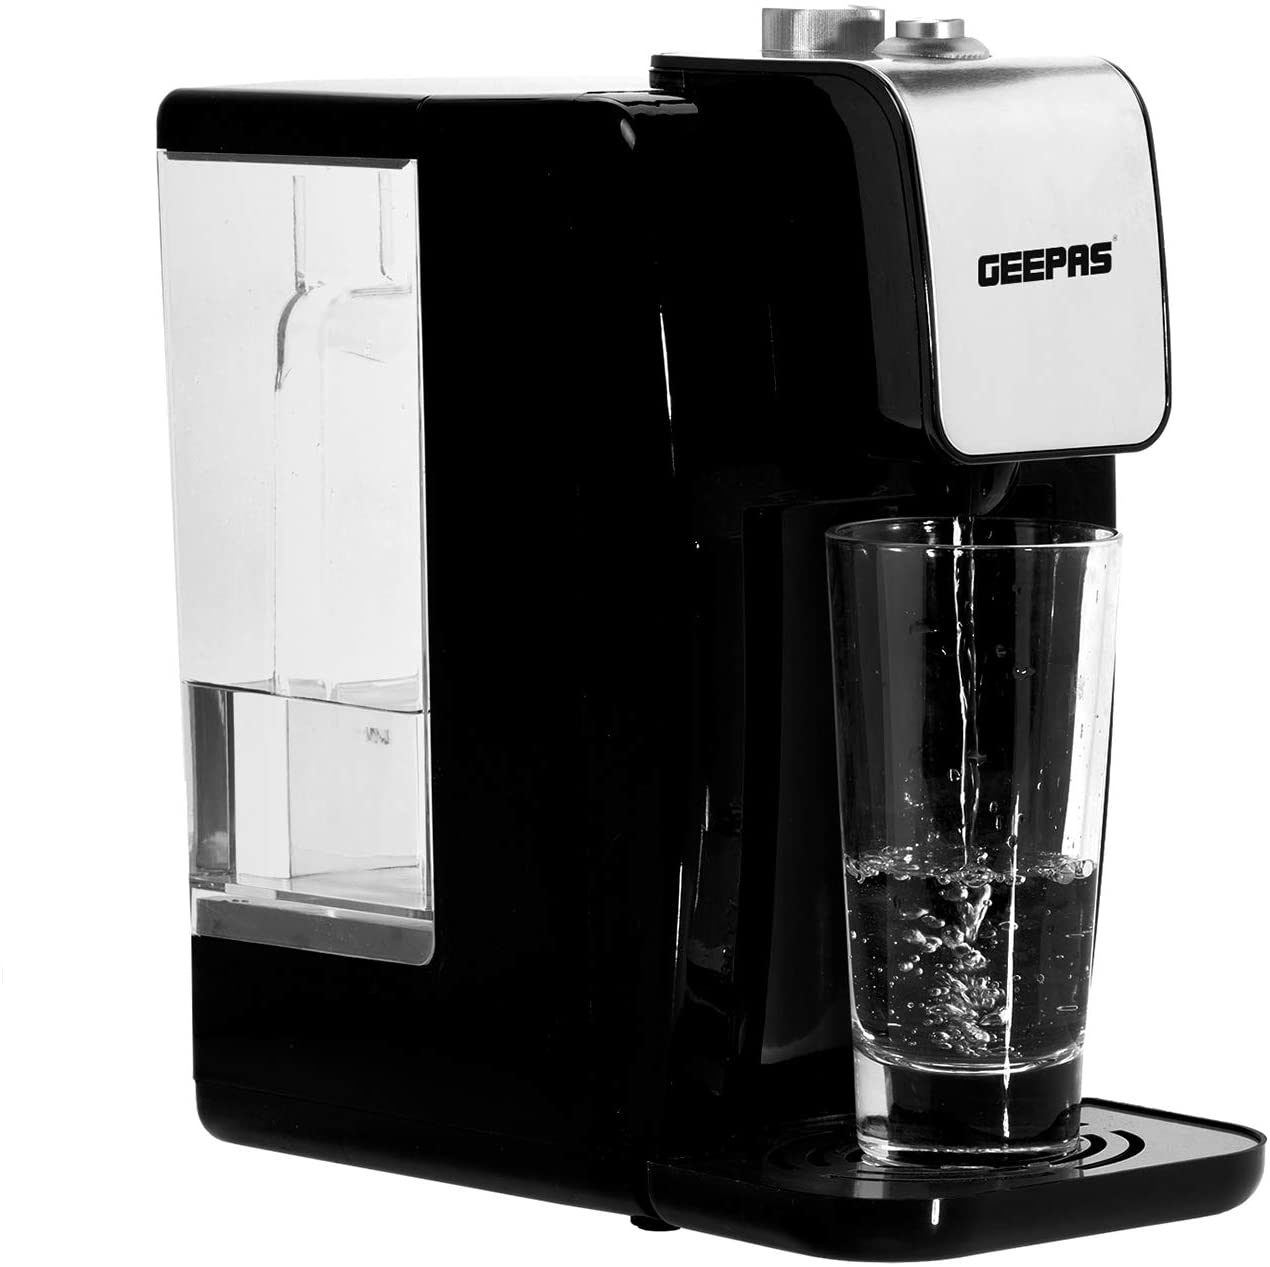 Geepas Electric Instant Hot Water Dispenser 2.2L Capacity | in Bahrain | Halabh.com